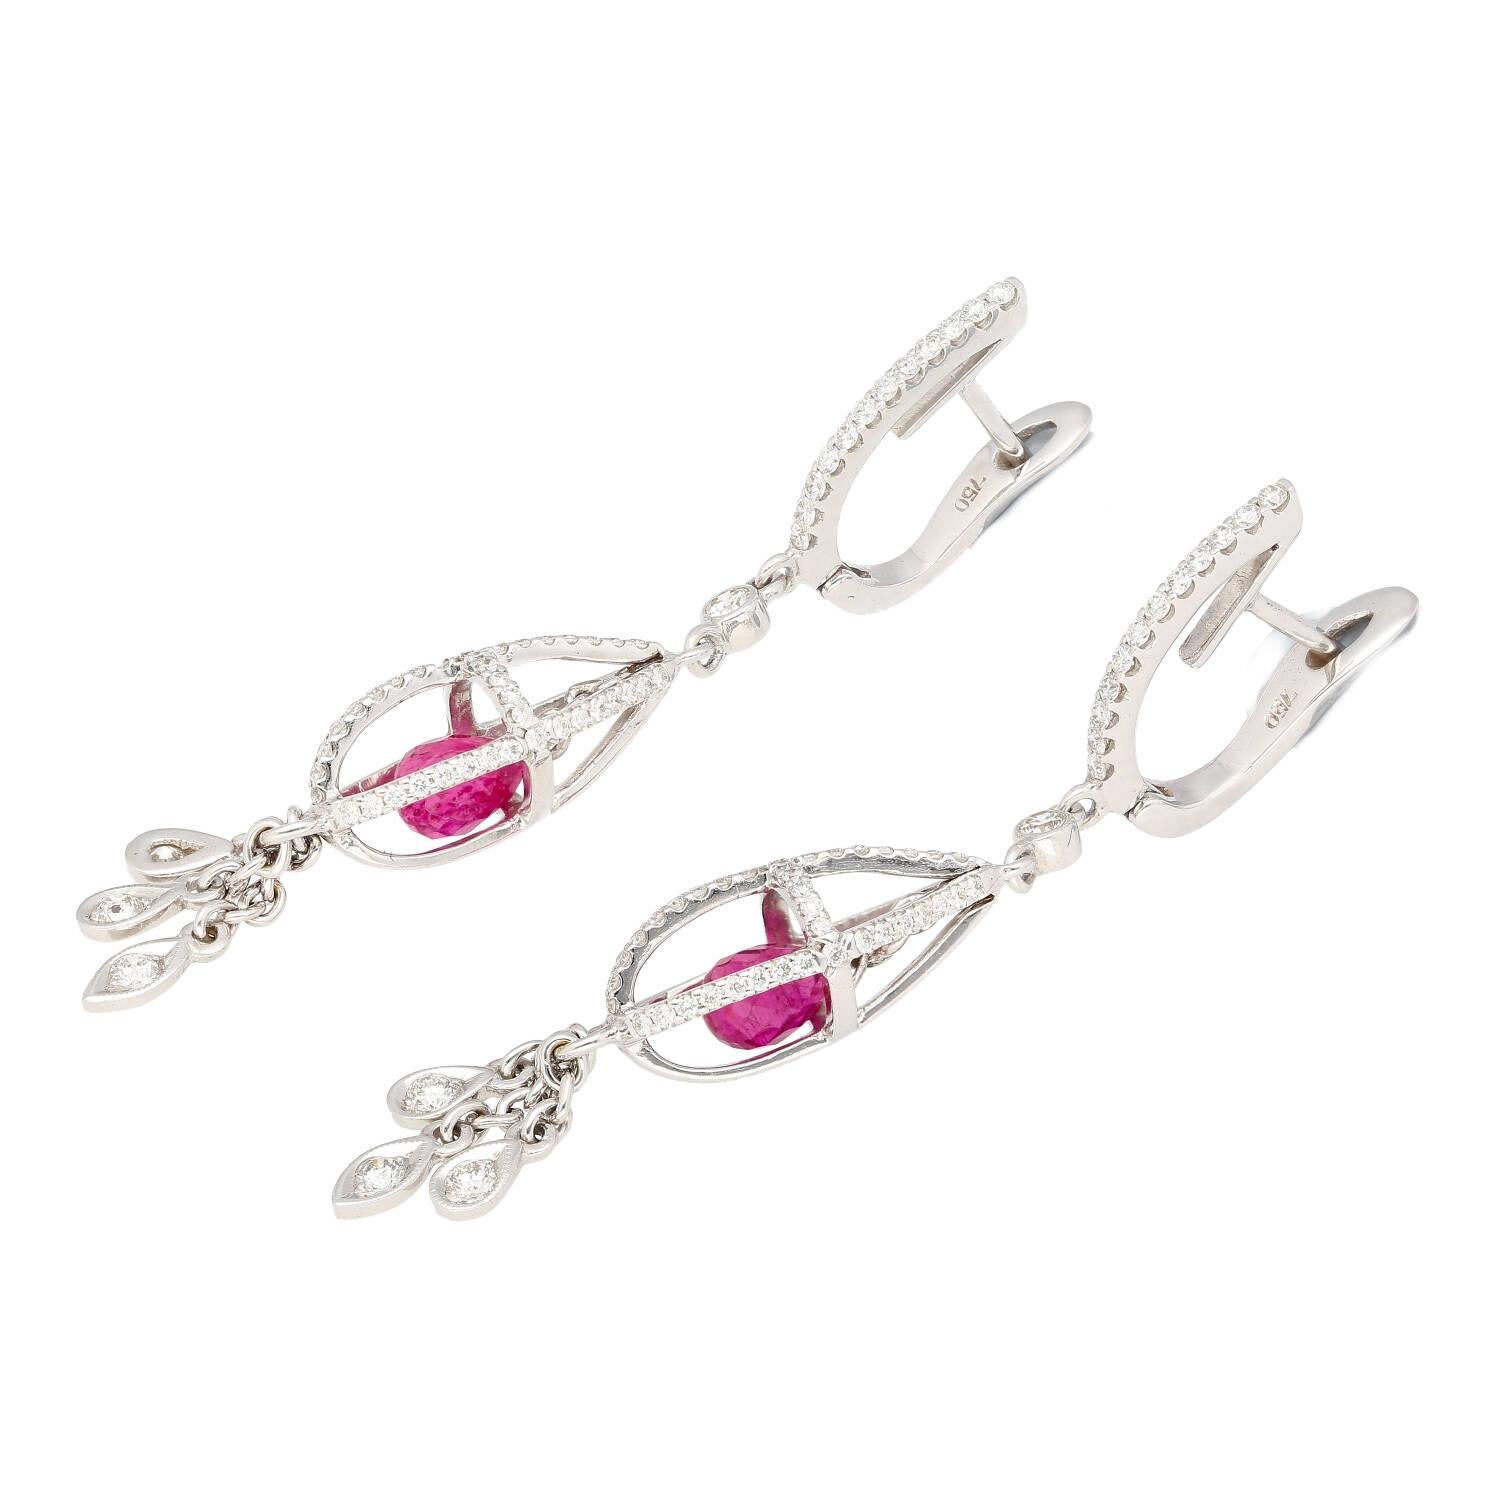 Belle Époque 1.40 Carat Pink Sapphire and Diamond Drop Cage Earrings in 18k White Gold For Sale